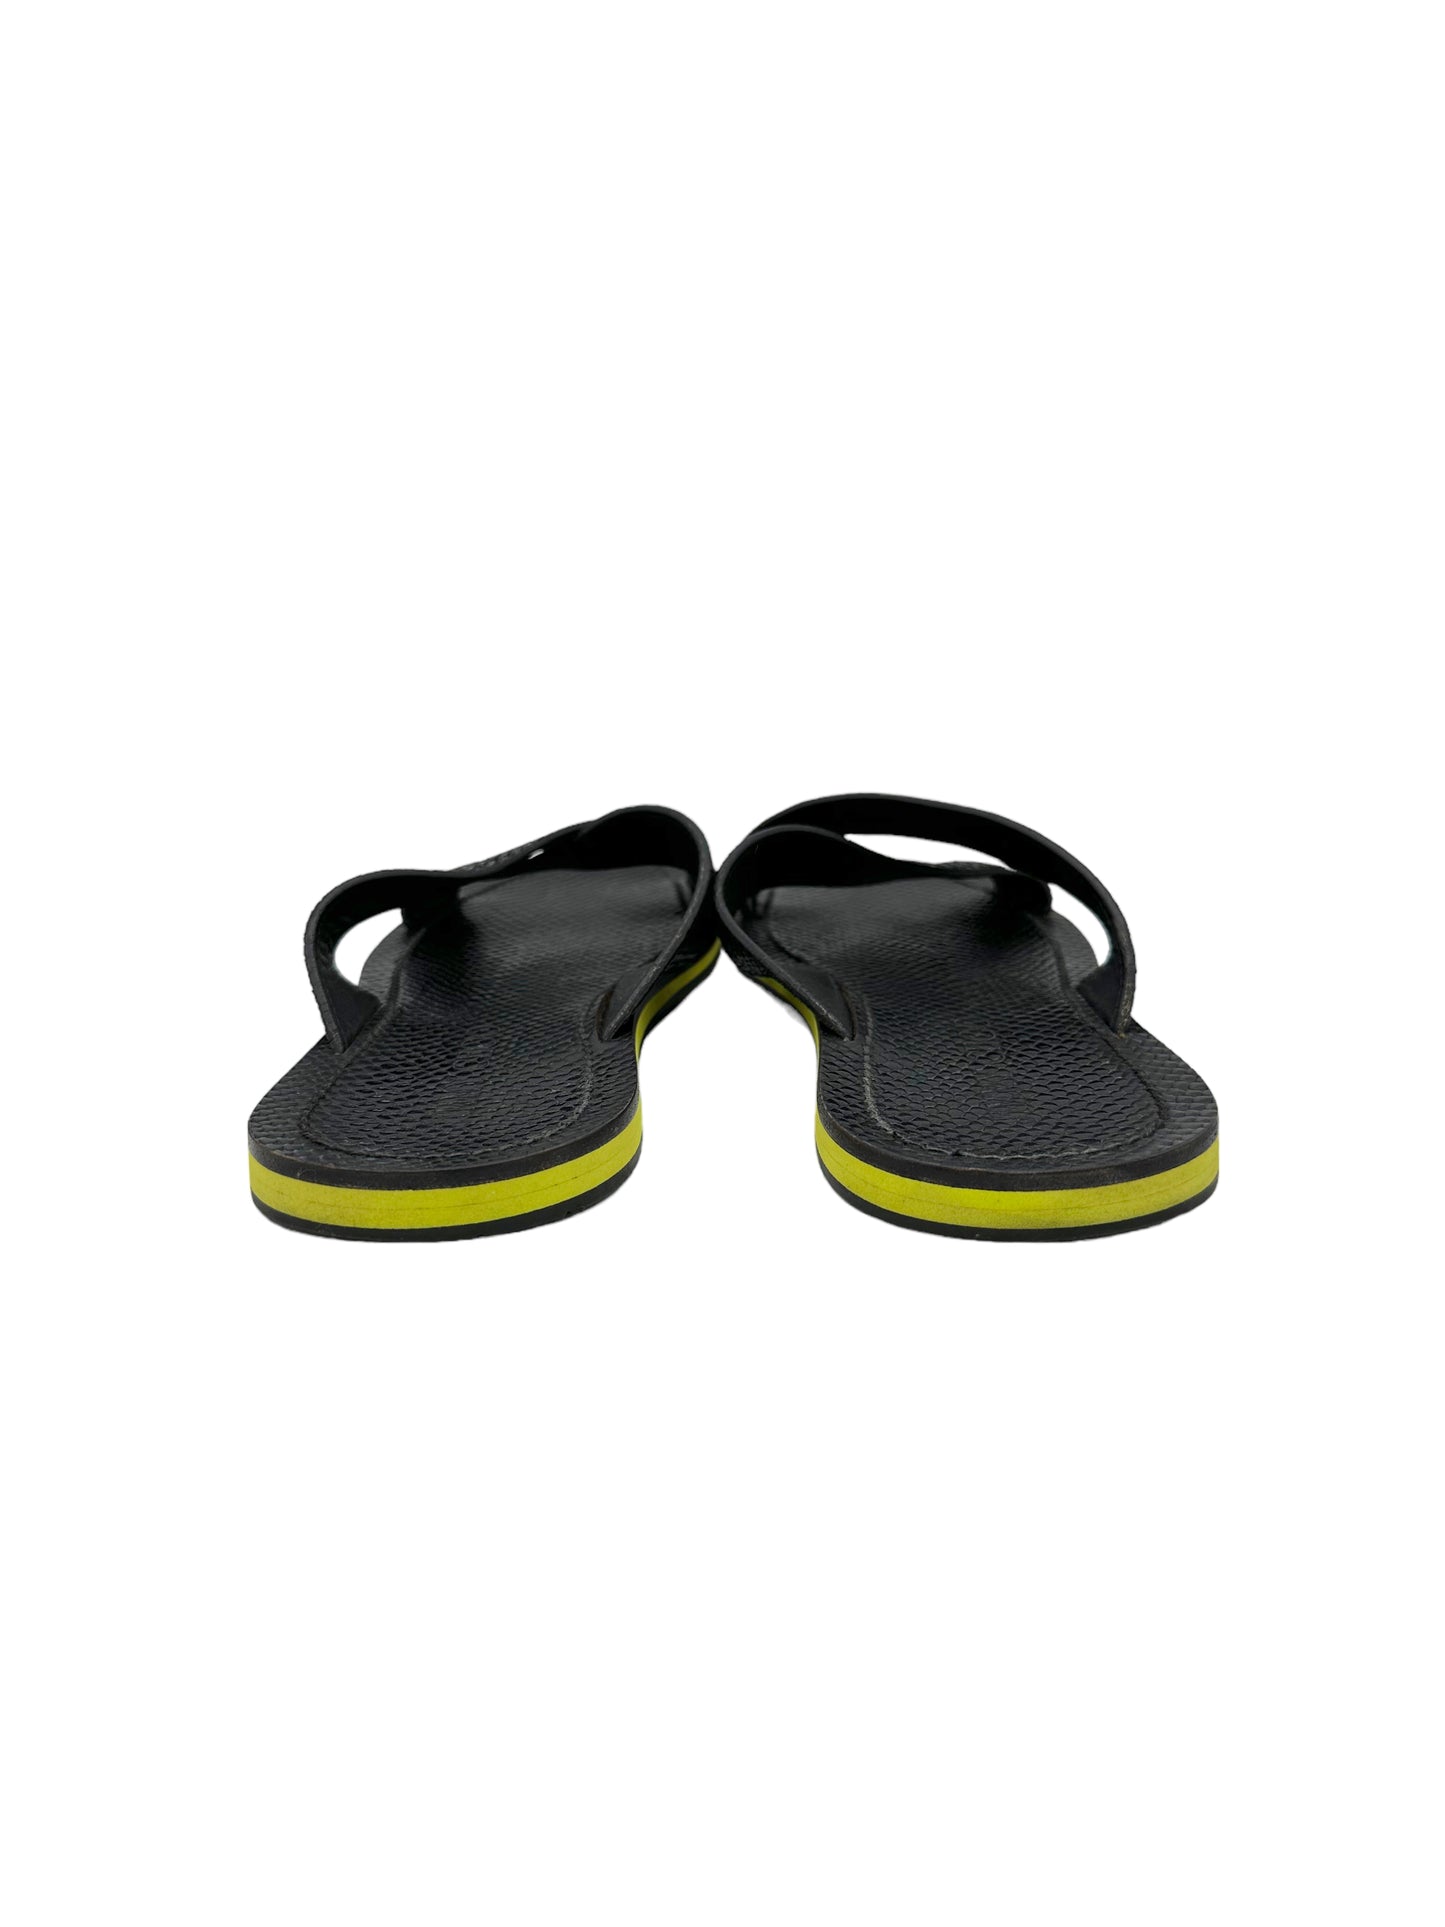 Jimmy Choo Black & Yellow Sandal - Genuine Design Luxury Consignment for Men. New & Pre-Owned Clothing, Shoes, & Accessories. Calgary, Canada